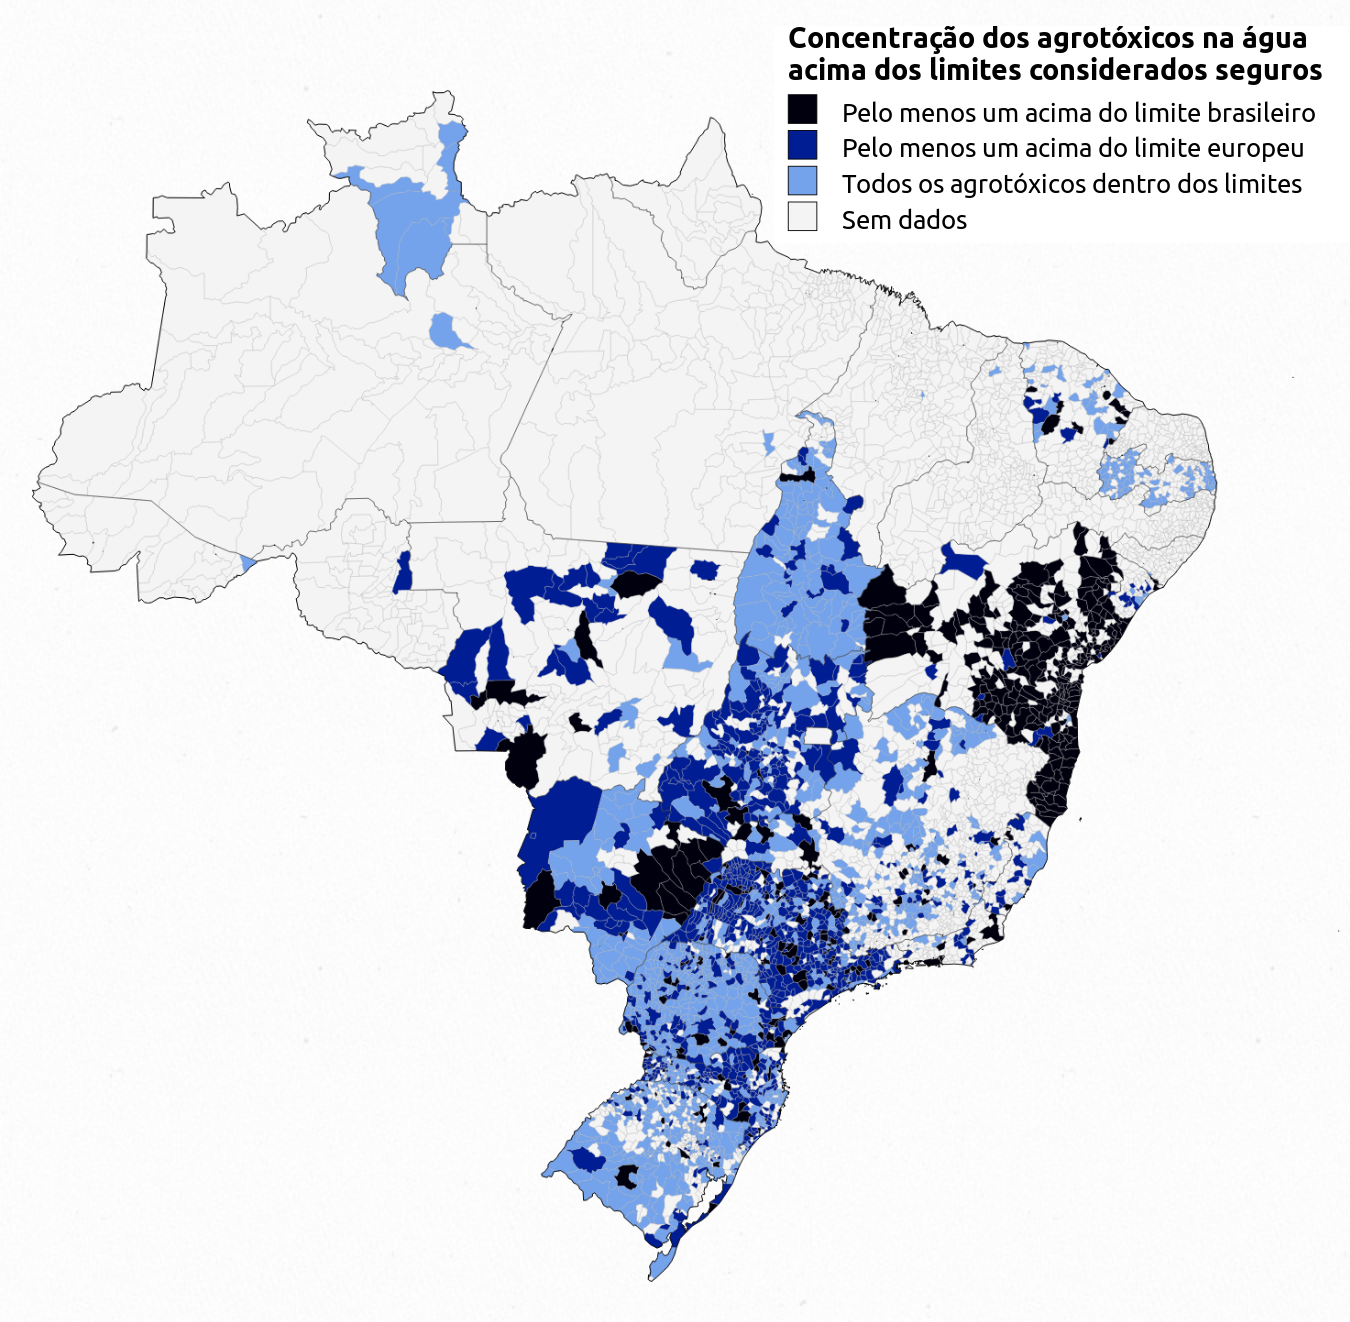 Concentration of pesticides in Brazilian drinking water